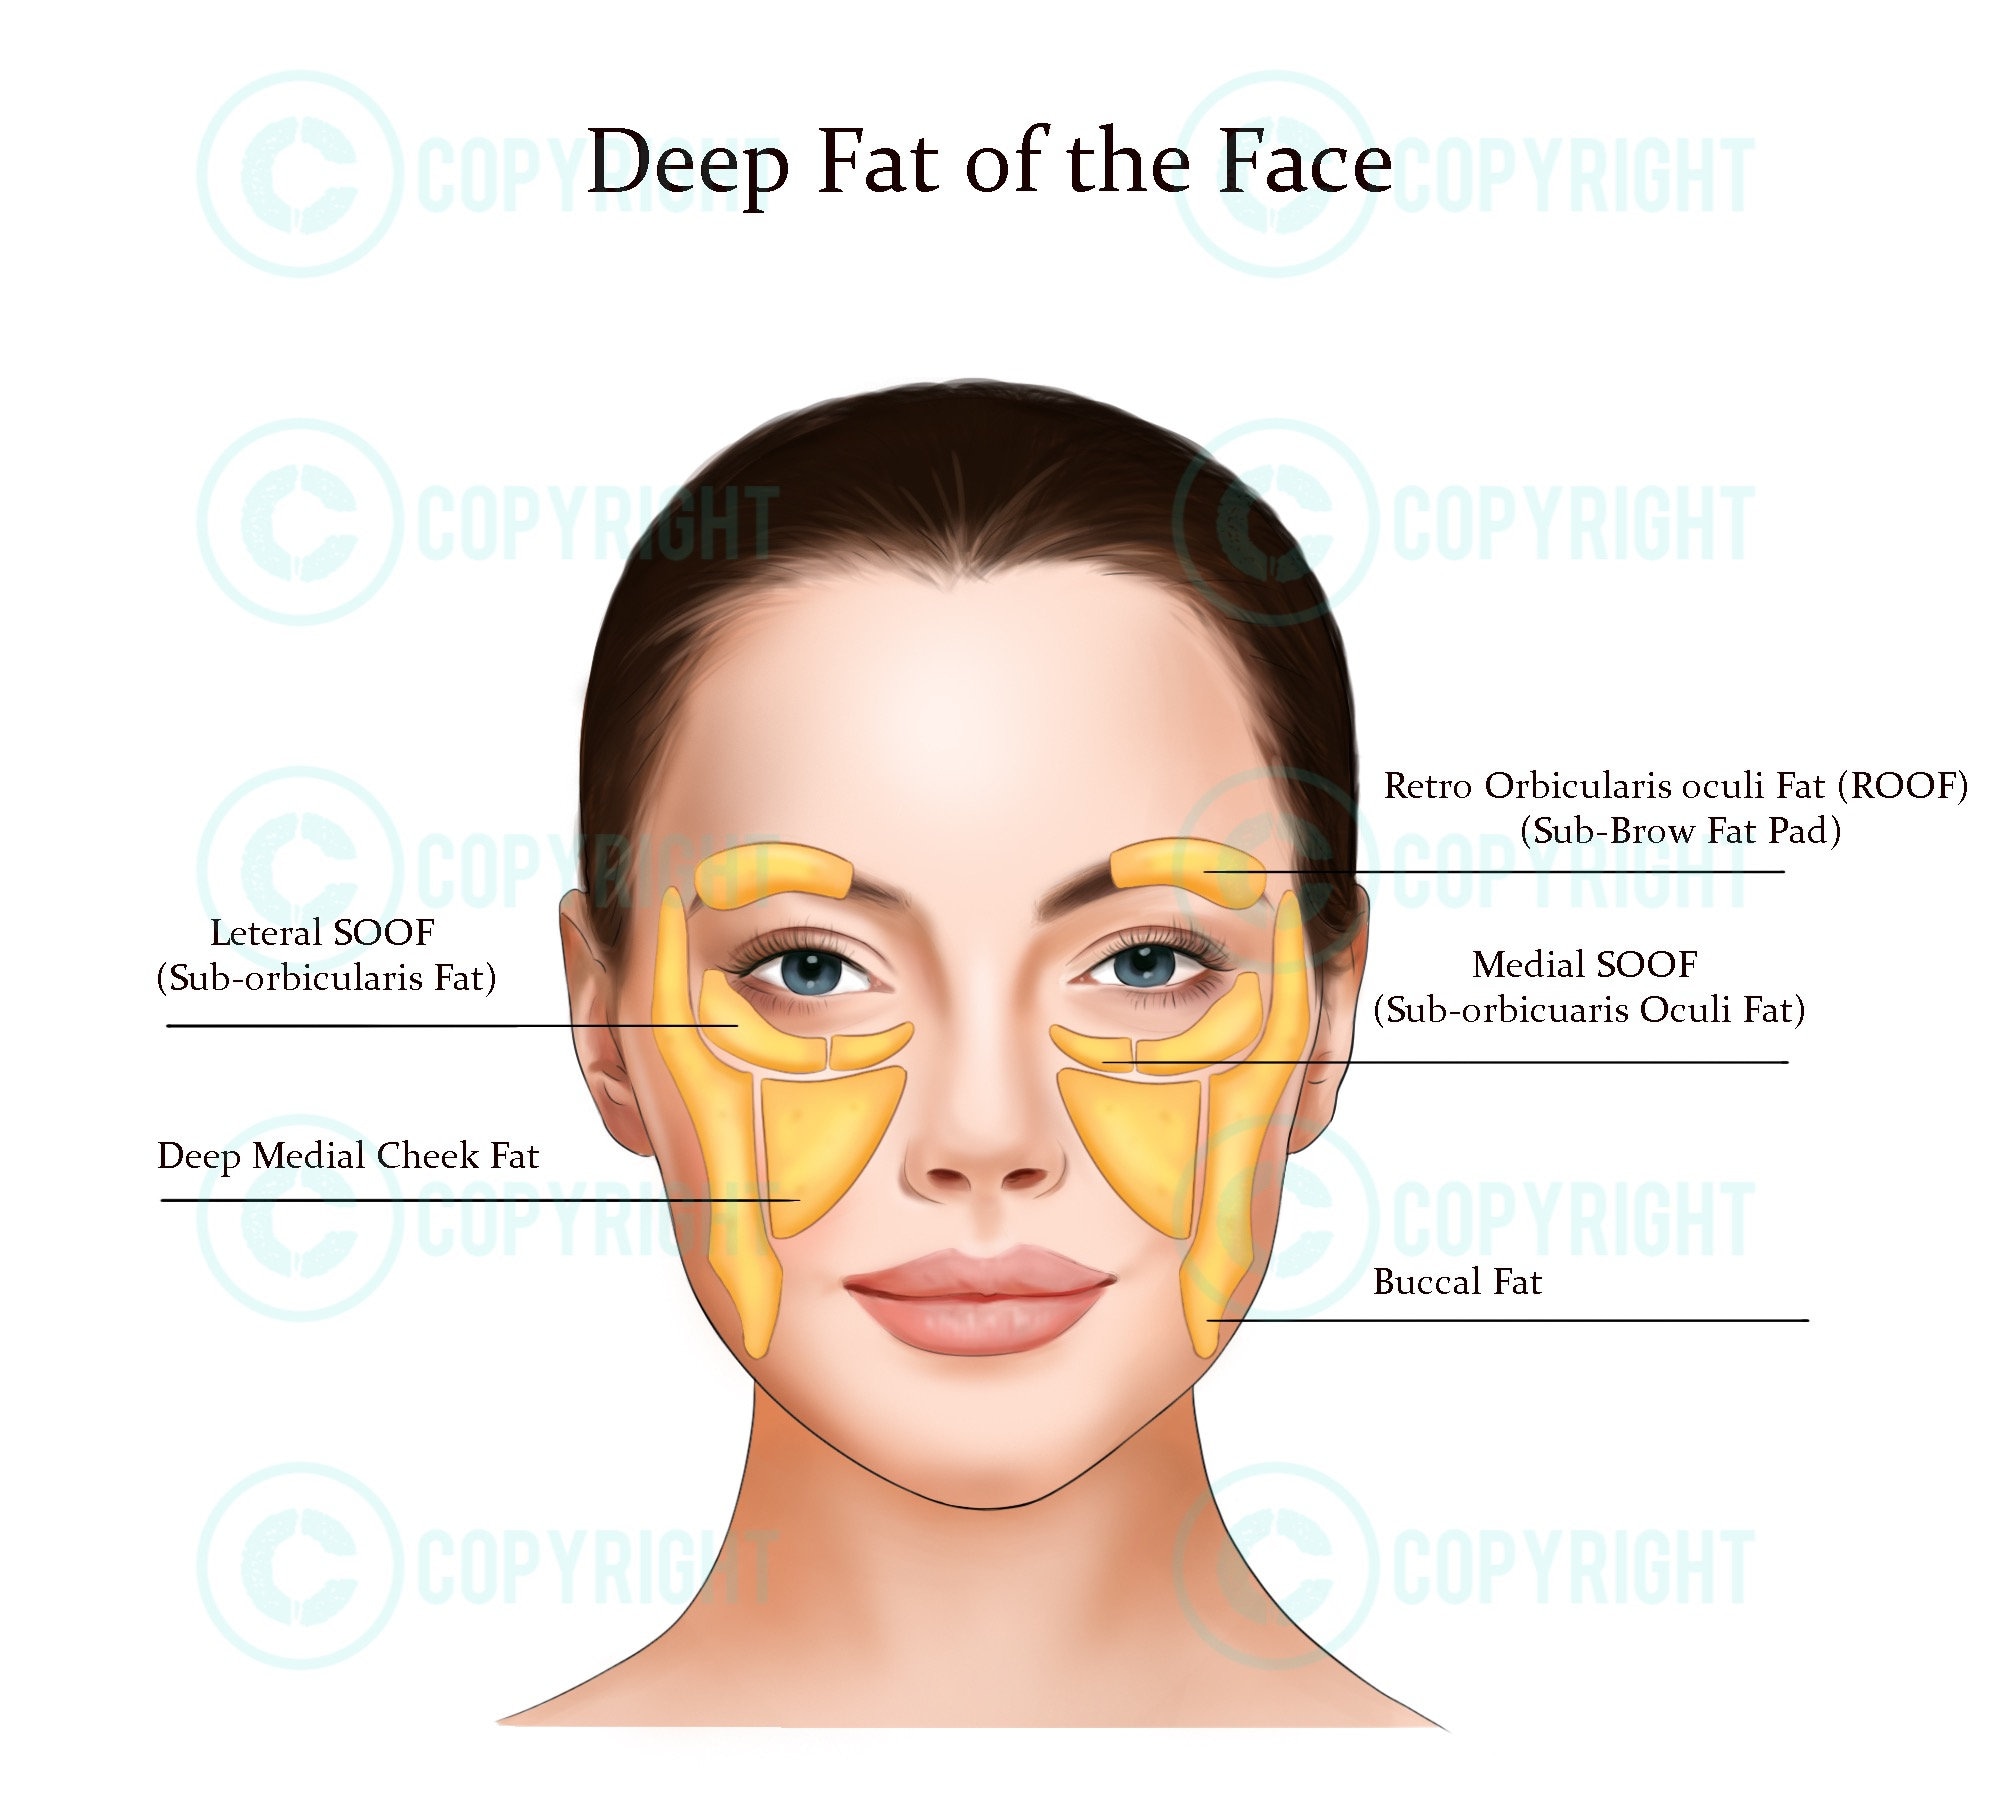 Deep Fat Pads The Face Botox And Filler Injector Anatomy Art Poster